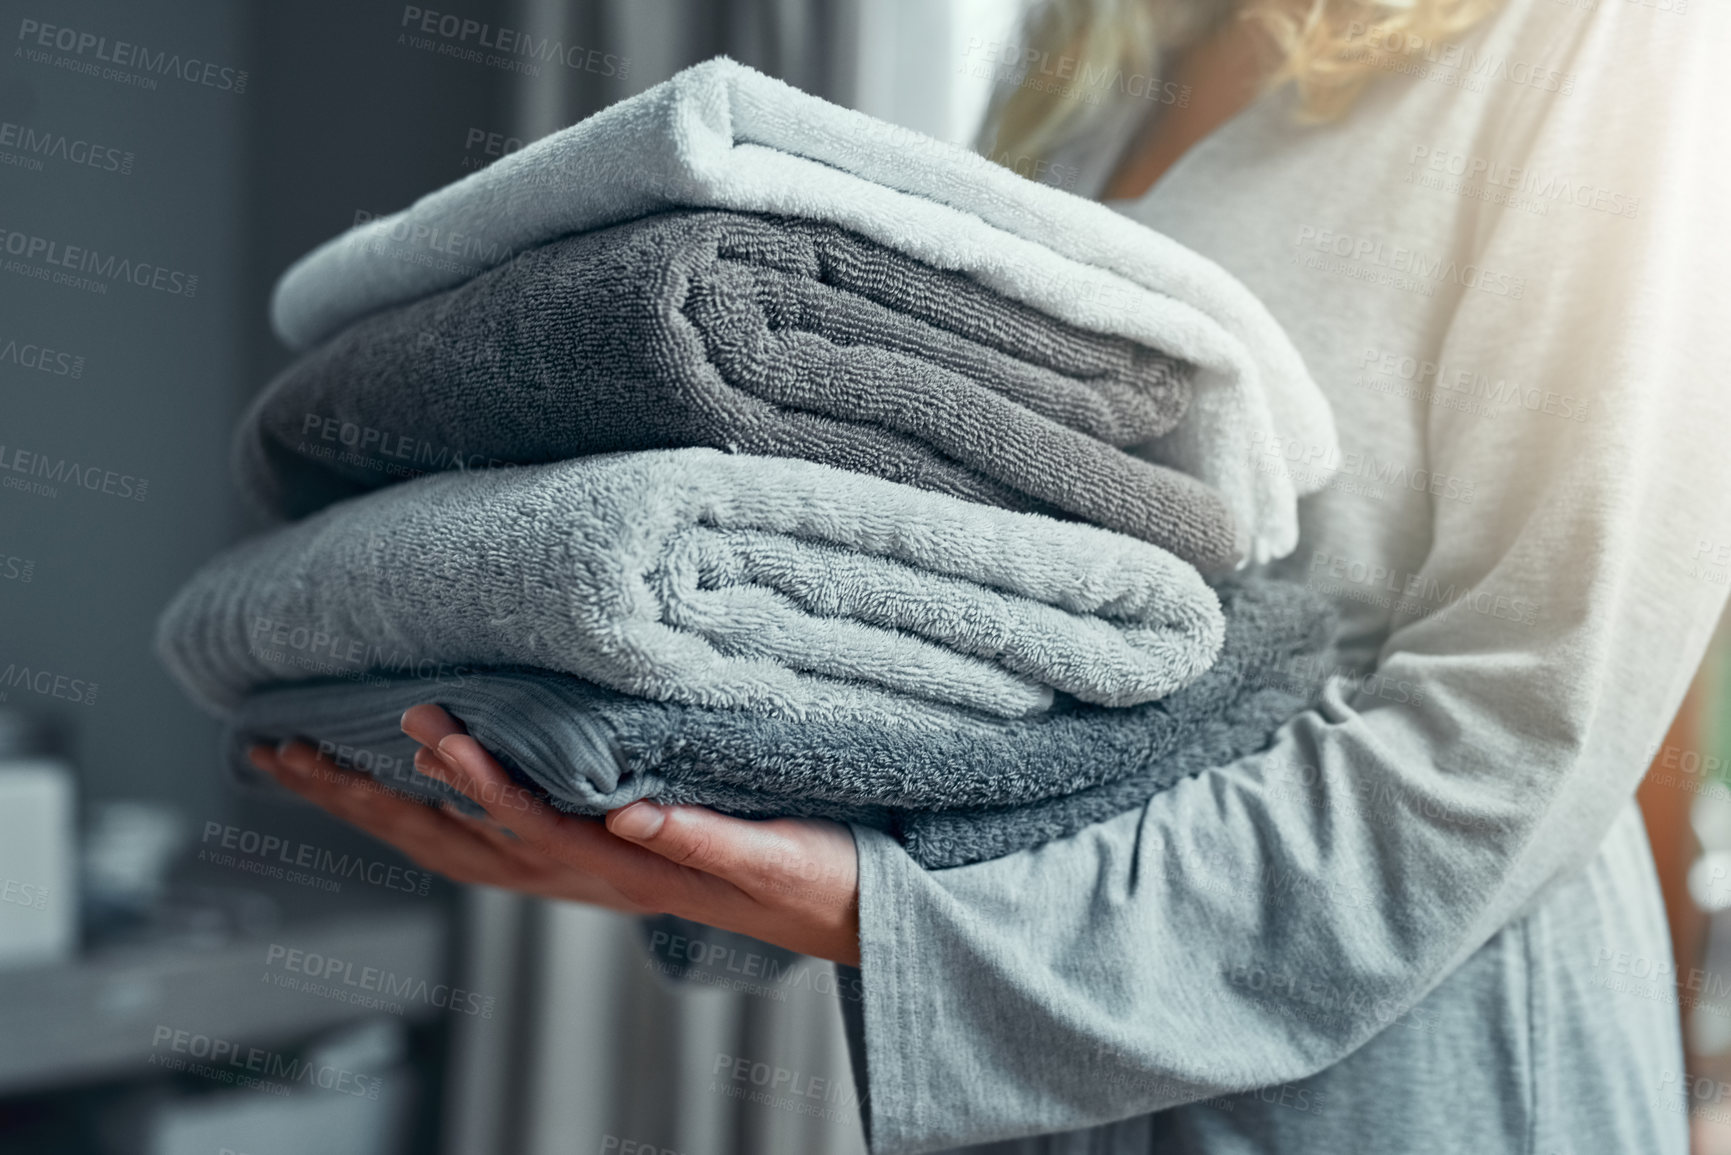 Buy stock photo Laundry, cleaning and a woman with a pile of towels in her home for hygiene or a spring clean day. Hospitality, service and a female cleaner carrying a stack of fresh or clean fabric in a hotel room